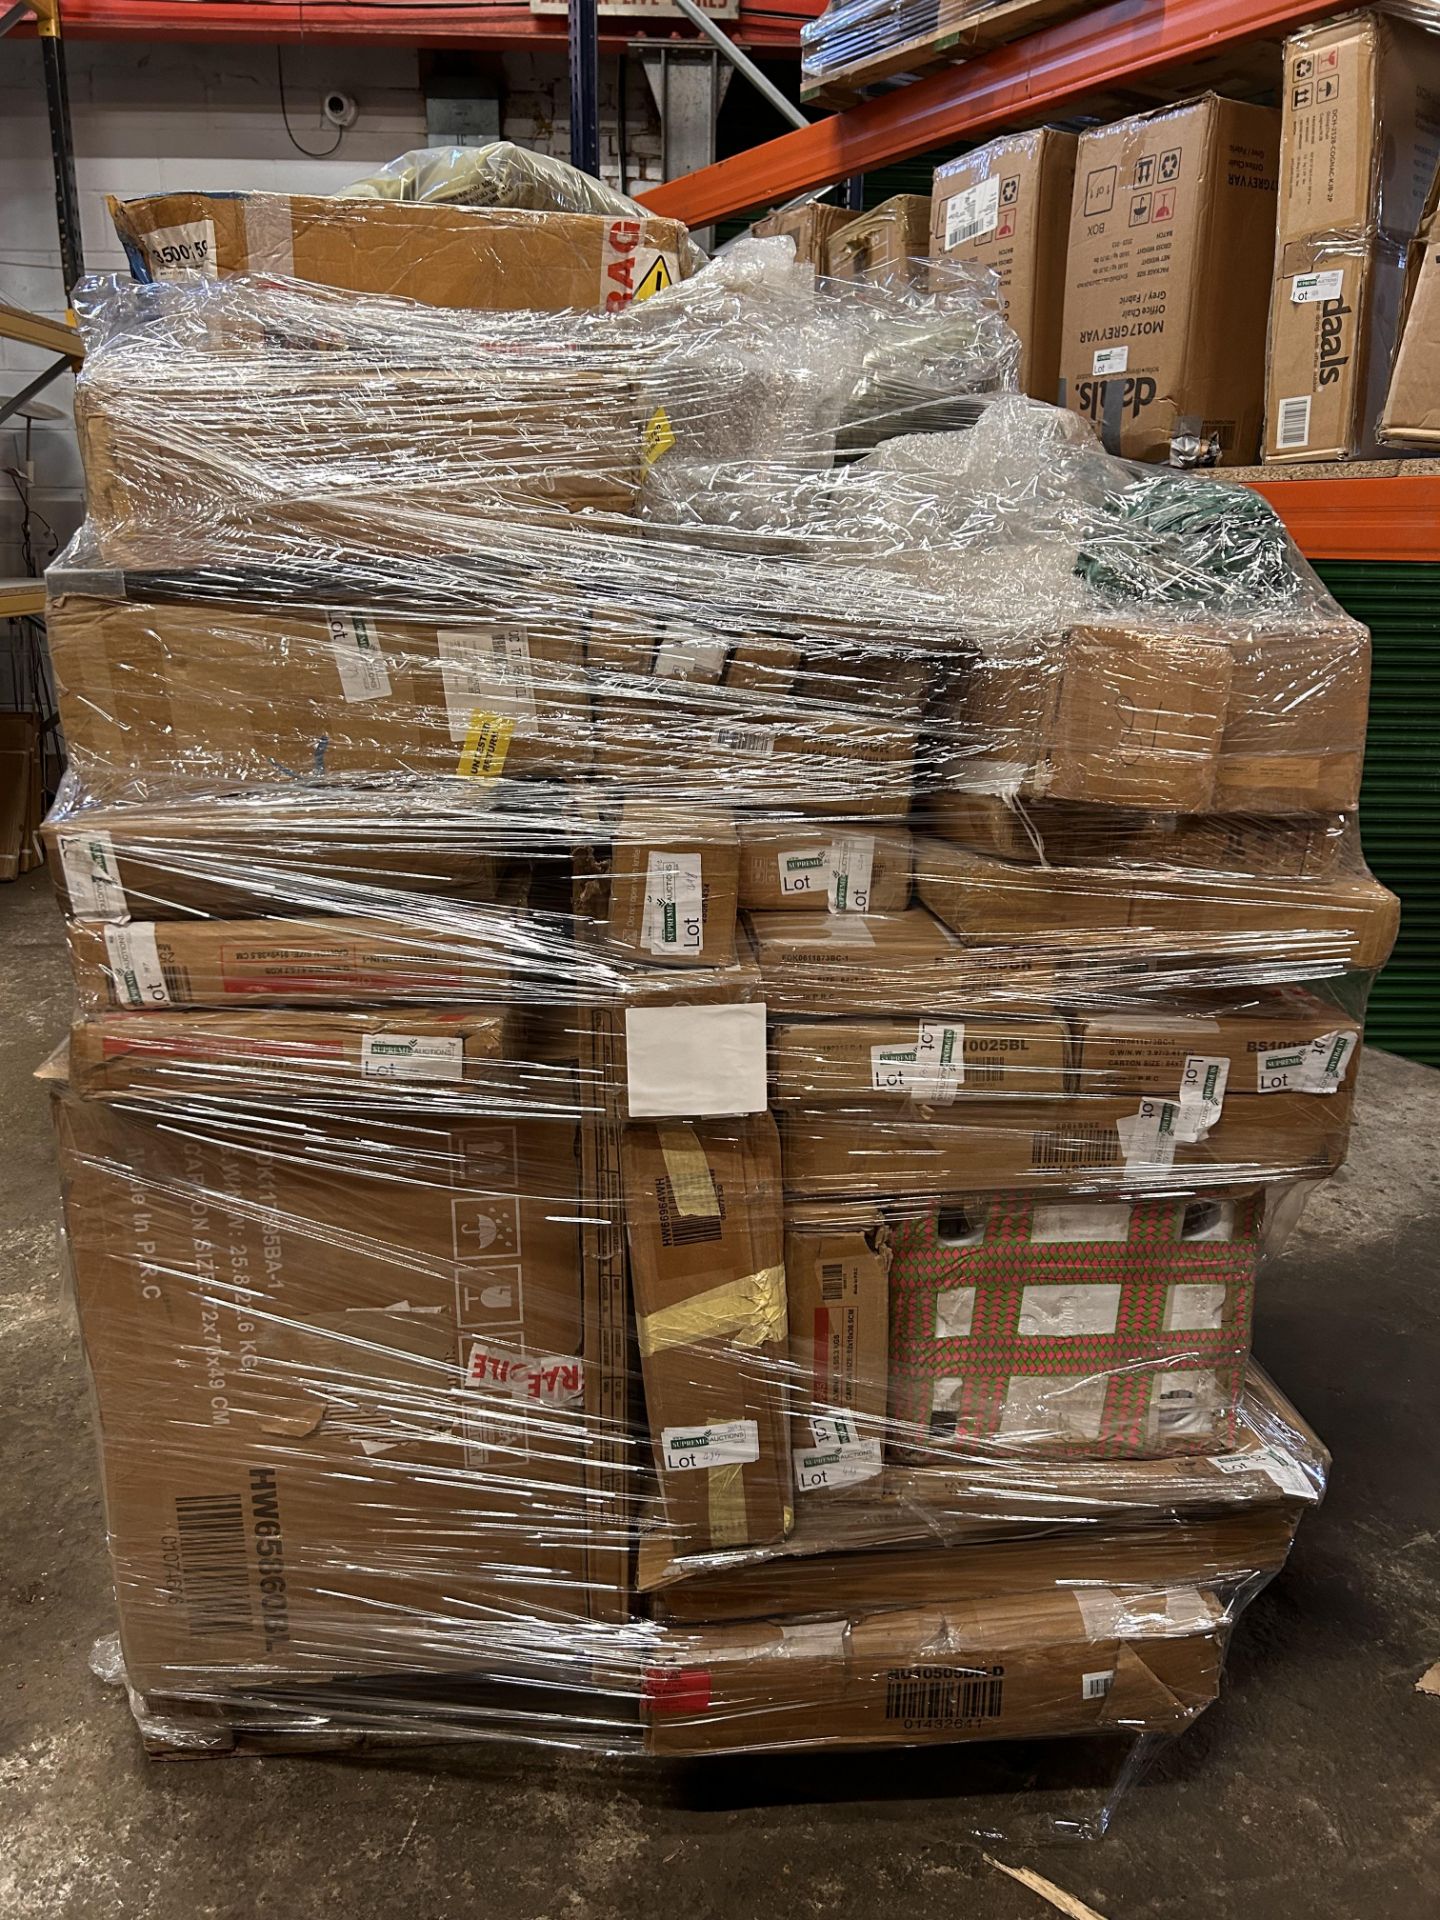 Mixed Returns Pallet - May contain furniture, chairs, laptop desks etc. - ER